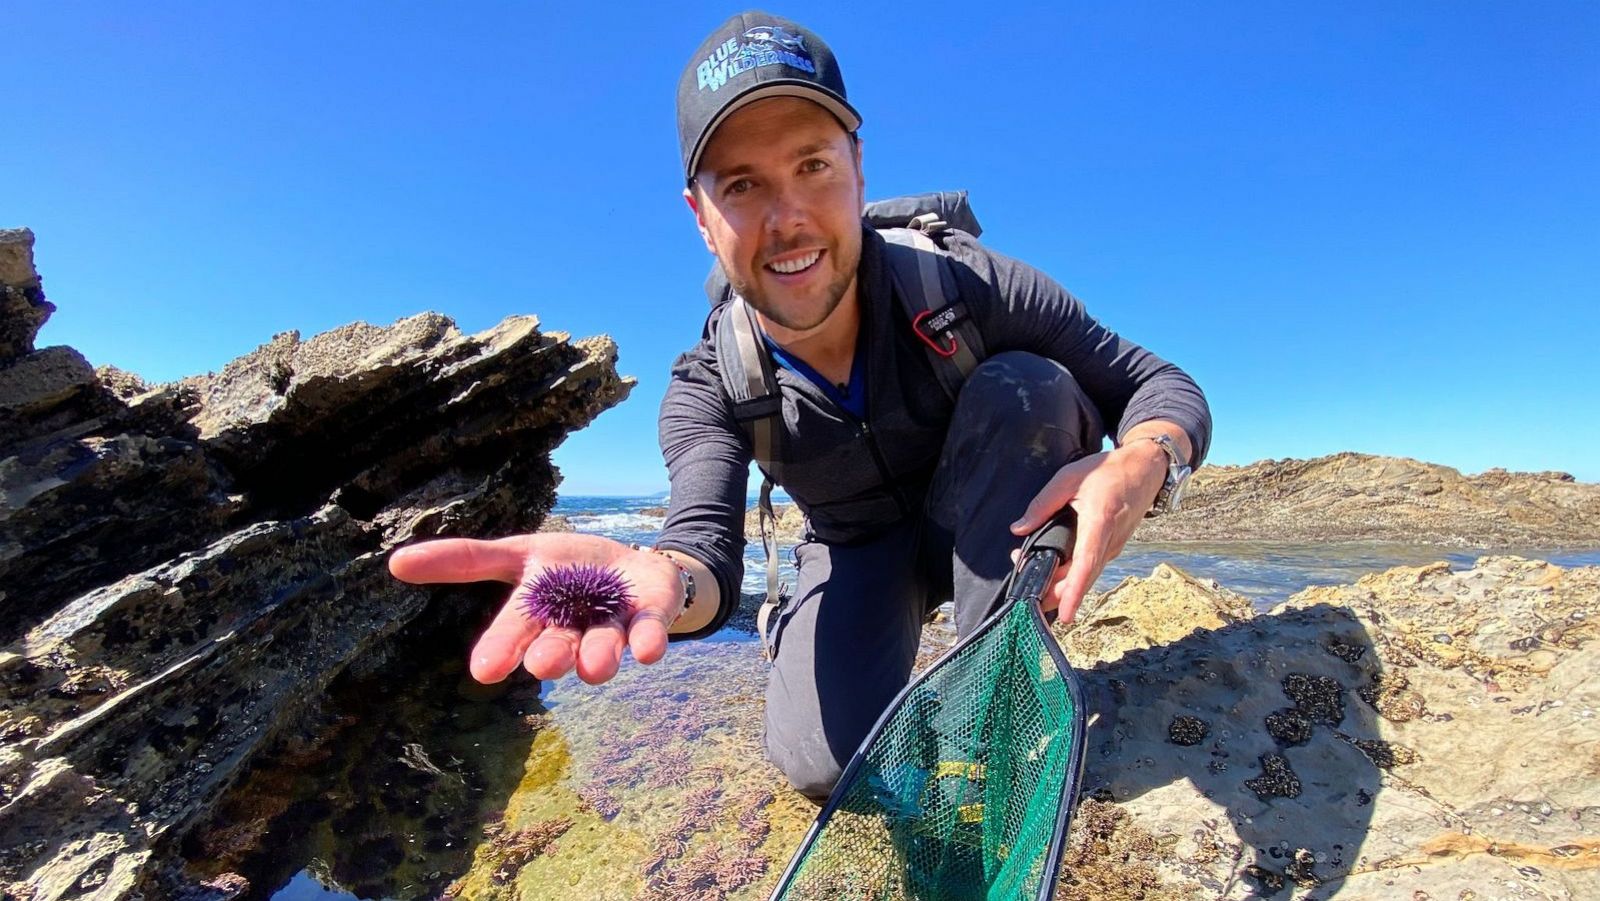 PHOTO: How to make a tide pool this summer is one of the videos on the Brave Wilderness YouTube channel.